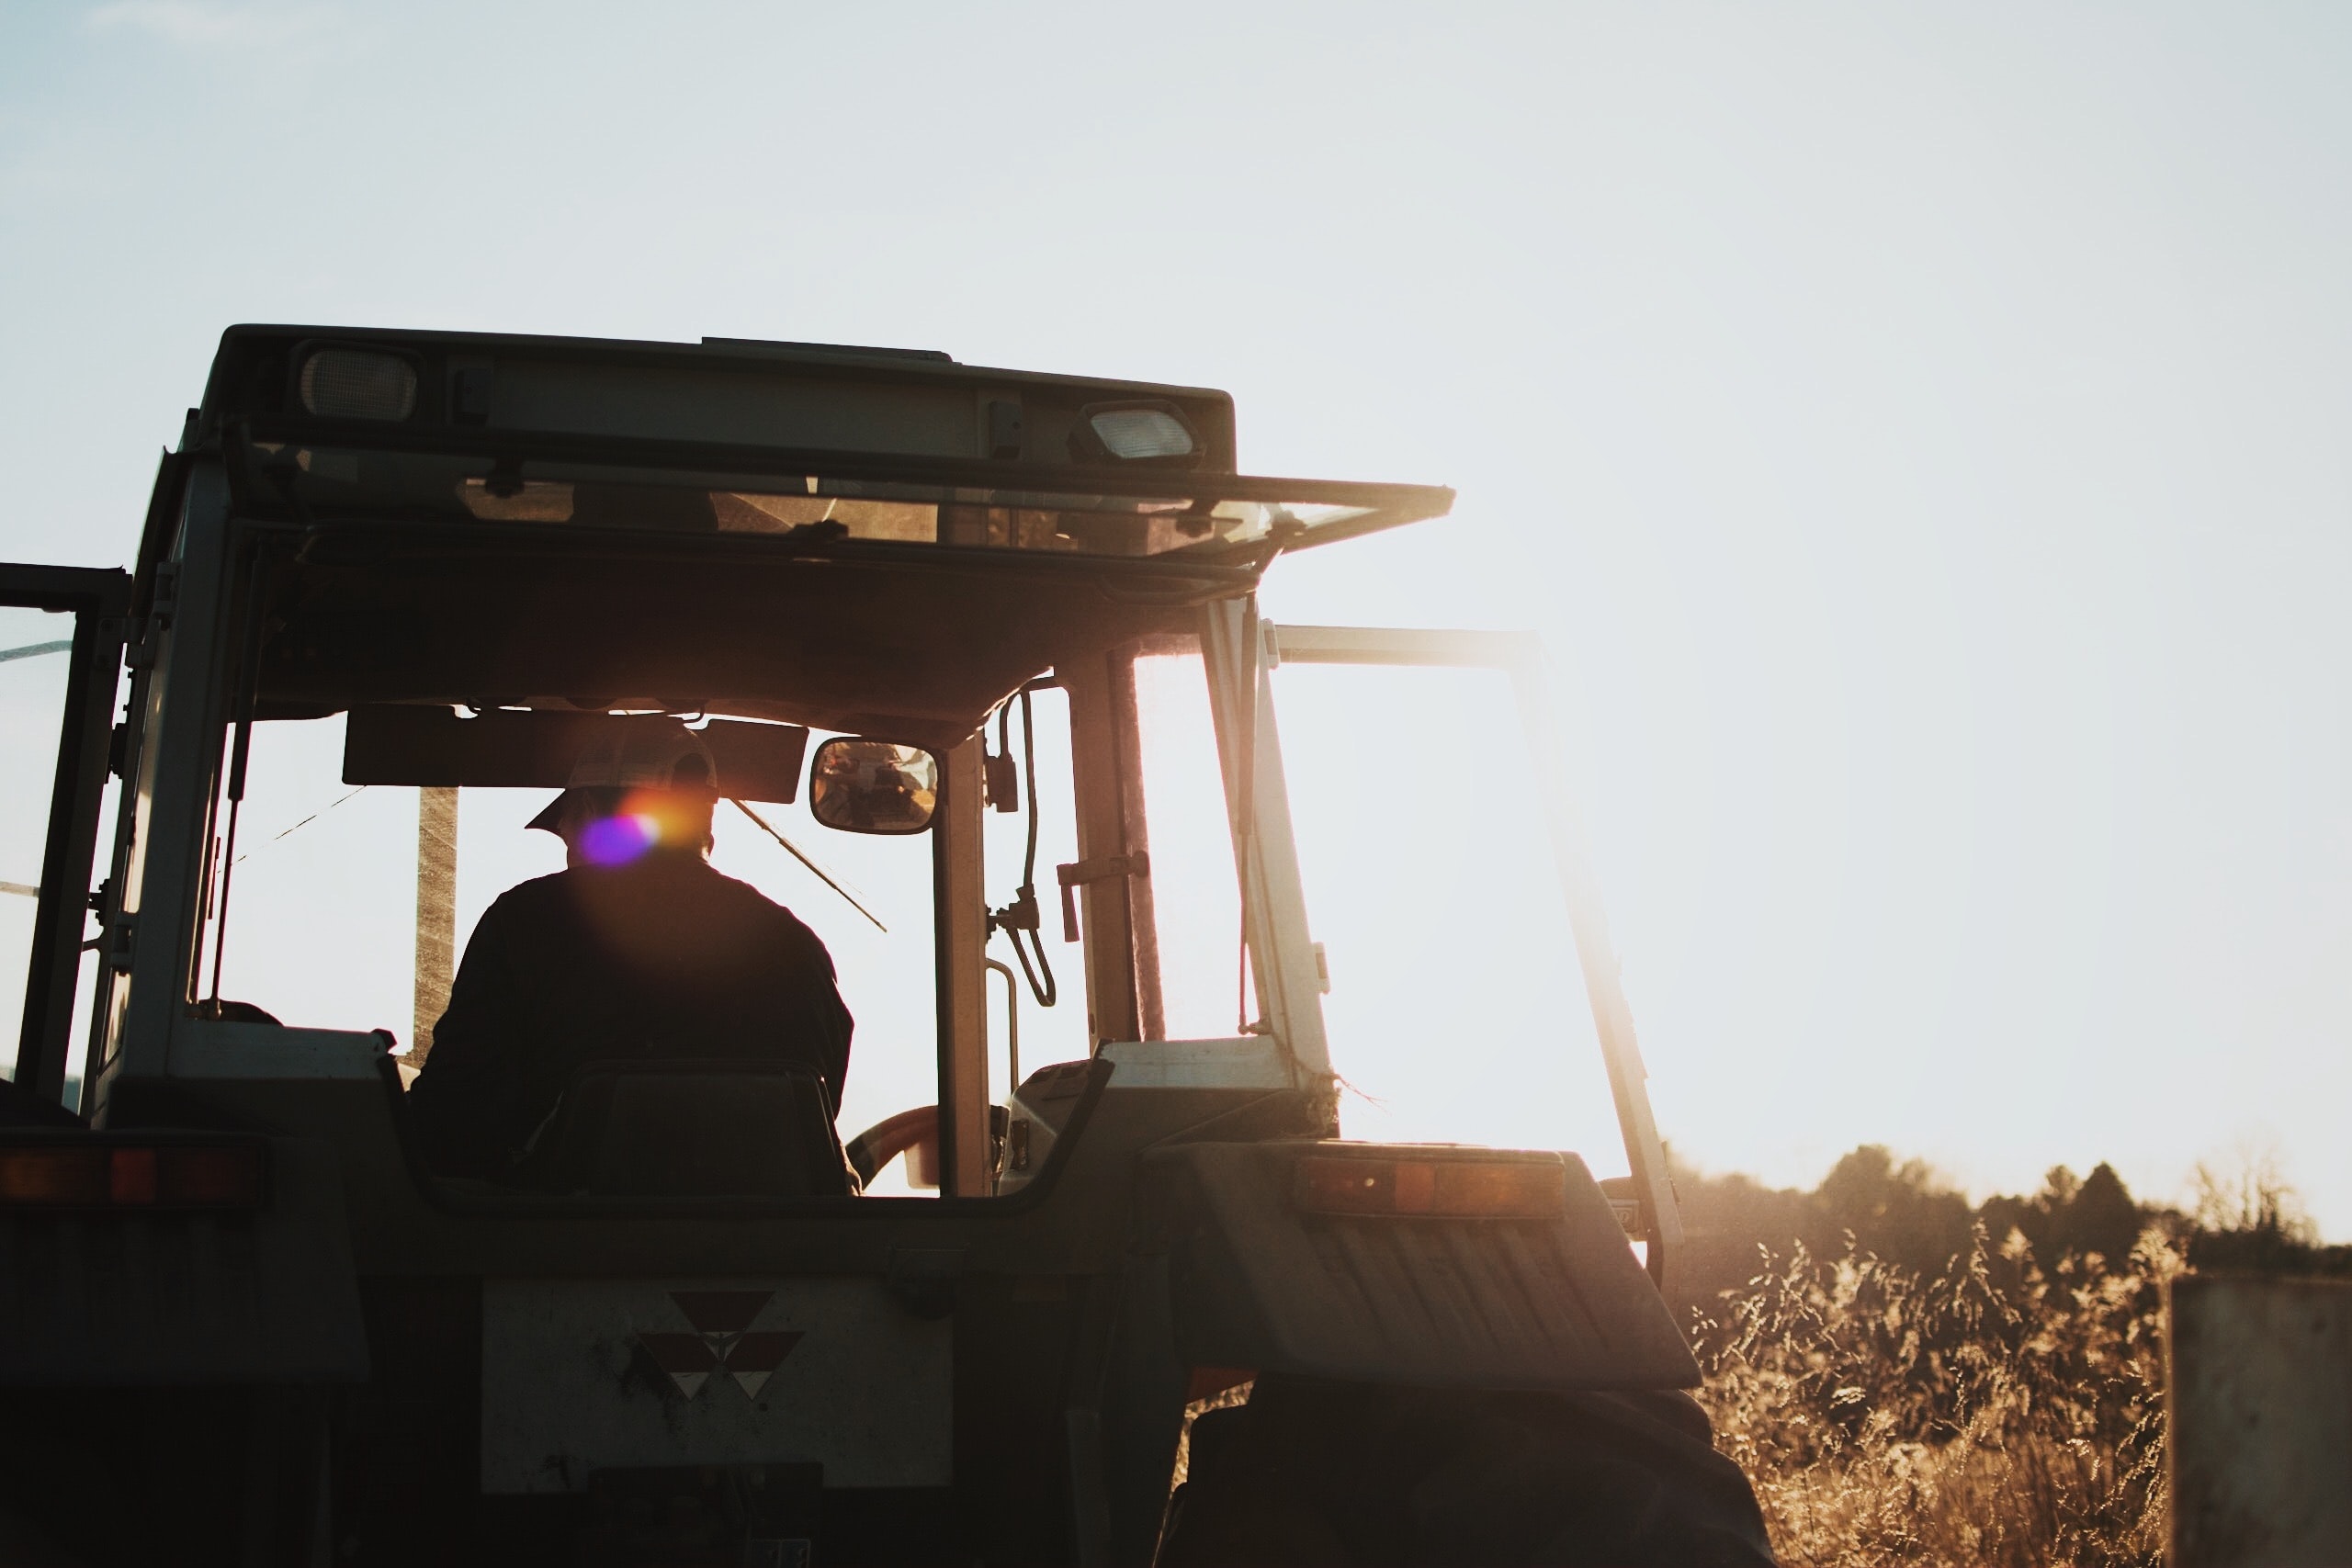 A man sitting in the driving seat of a tractor with a rollover cage, early morning soon after sunrise, shot from behind